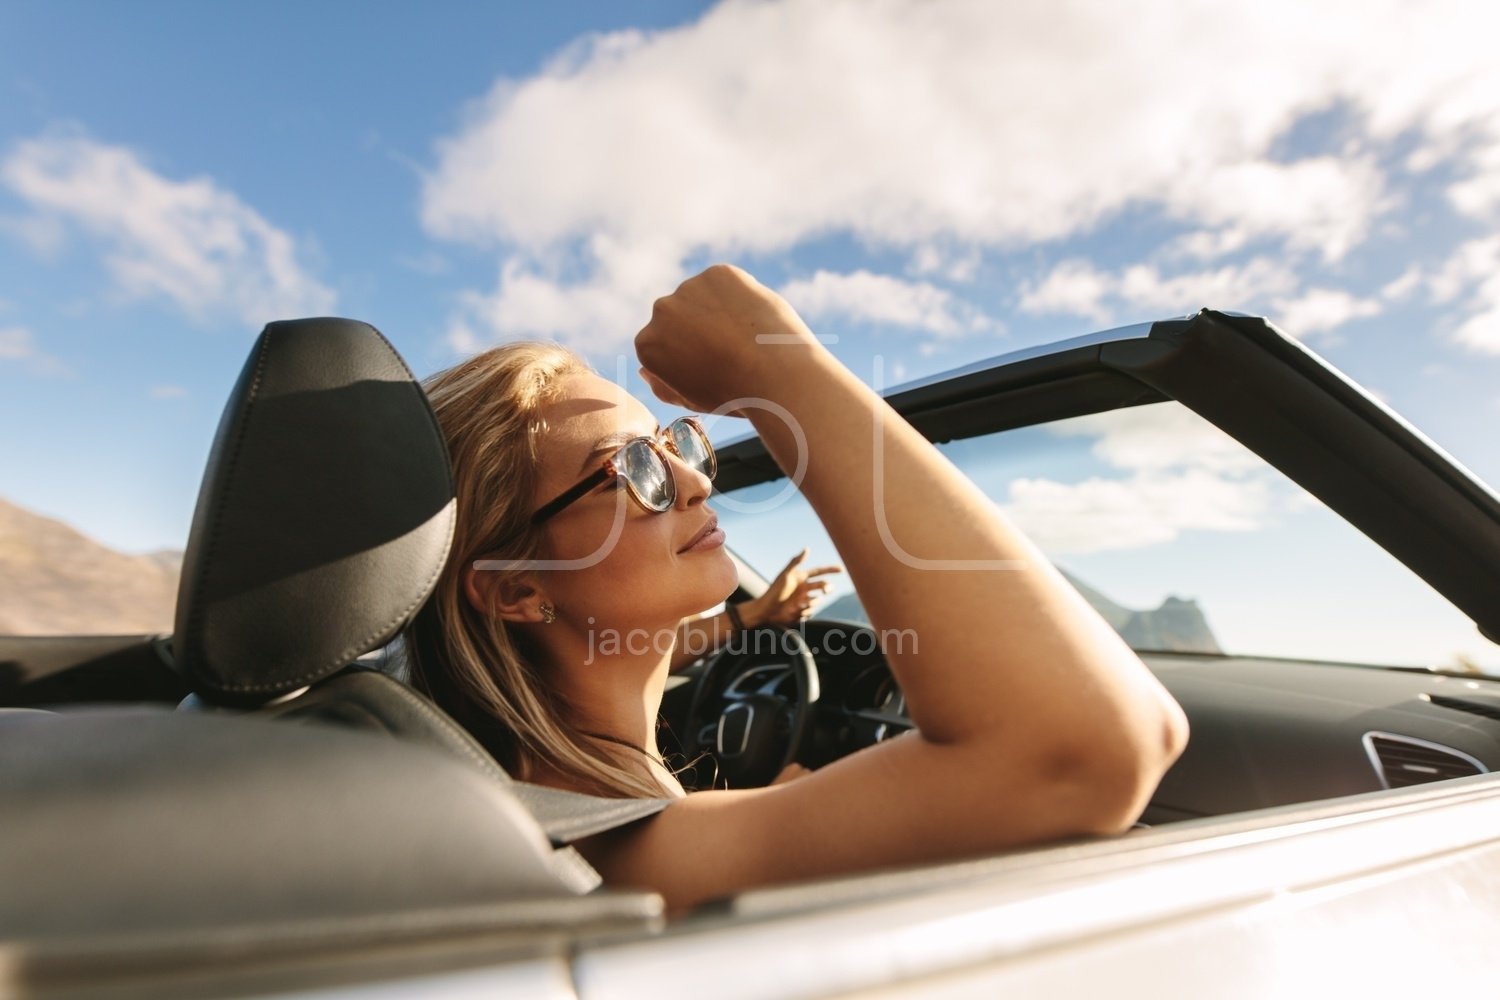 Road Trip Safety Checklist - Travel Tips For A Safe Trip